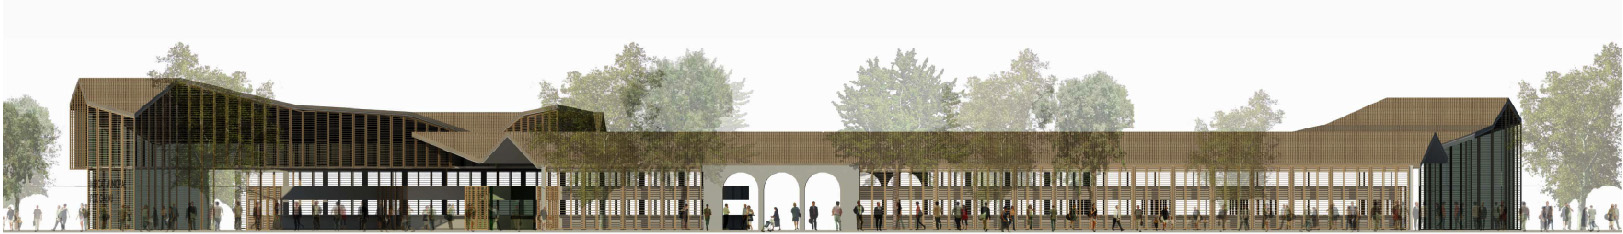 The project GO THROUGH THE MARKET, CROSS THE SQUARES unanimously wins the contest of ideas for the restructuring of the Plaça Pere Garau square, the Municipal Market Pere Garau and its surroundings